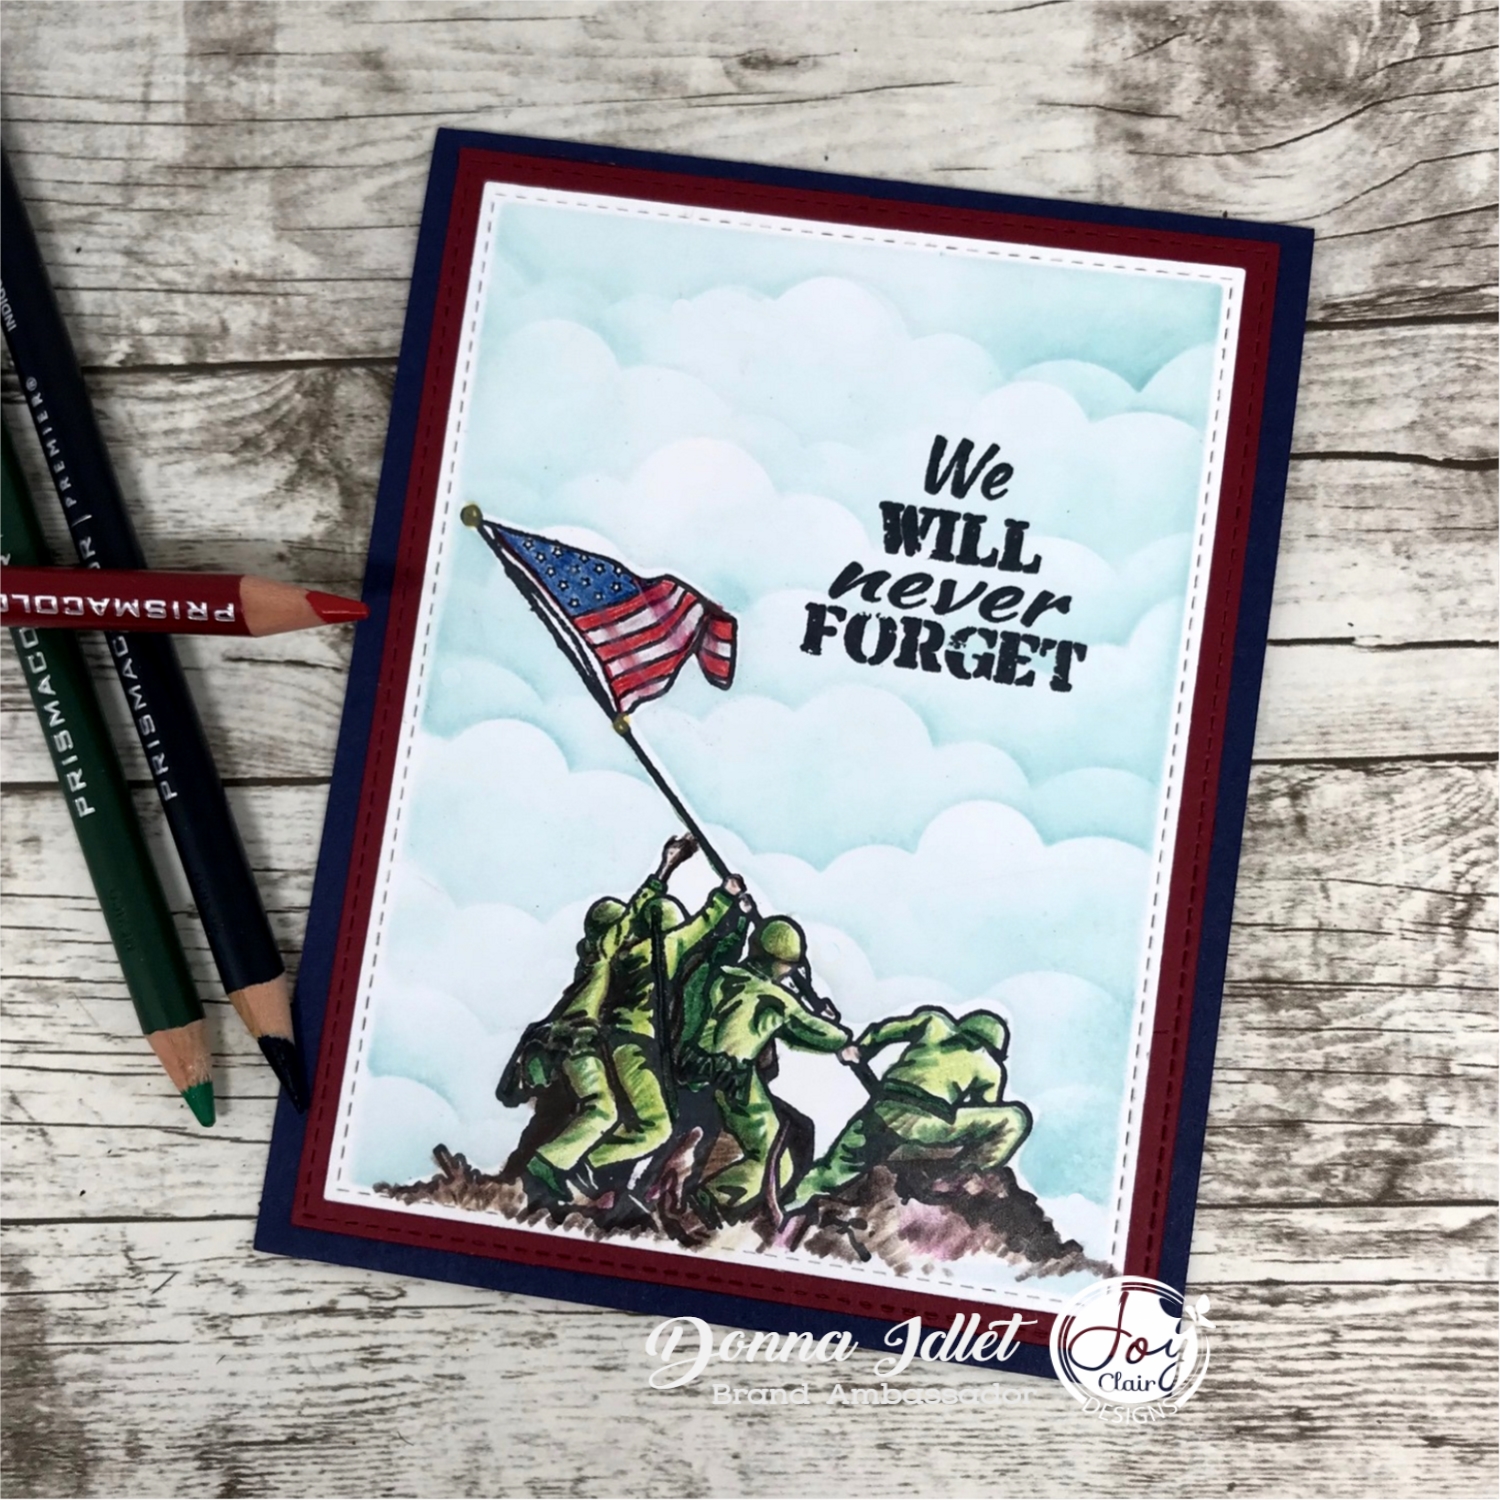 A DIY Heroes Card to recognize the work of heroes that we will never forget.